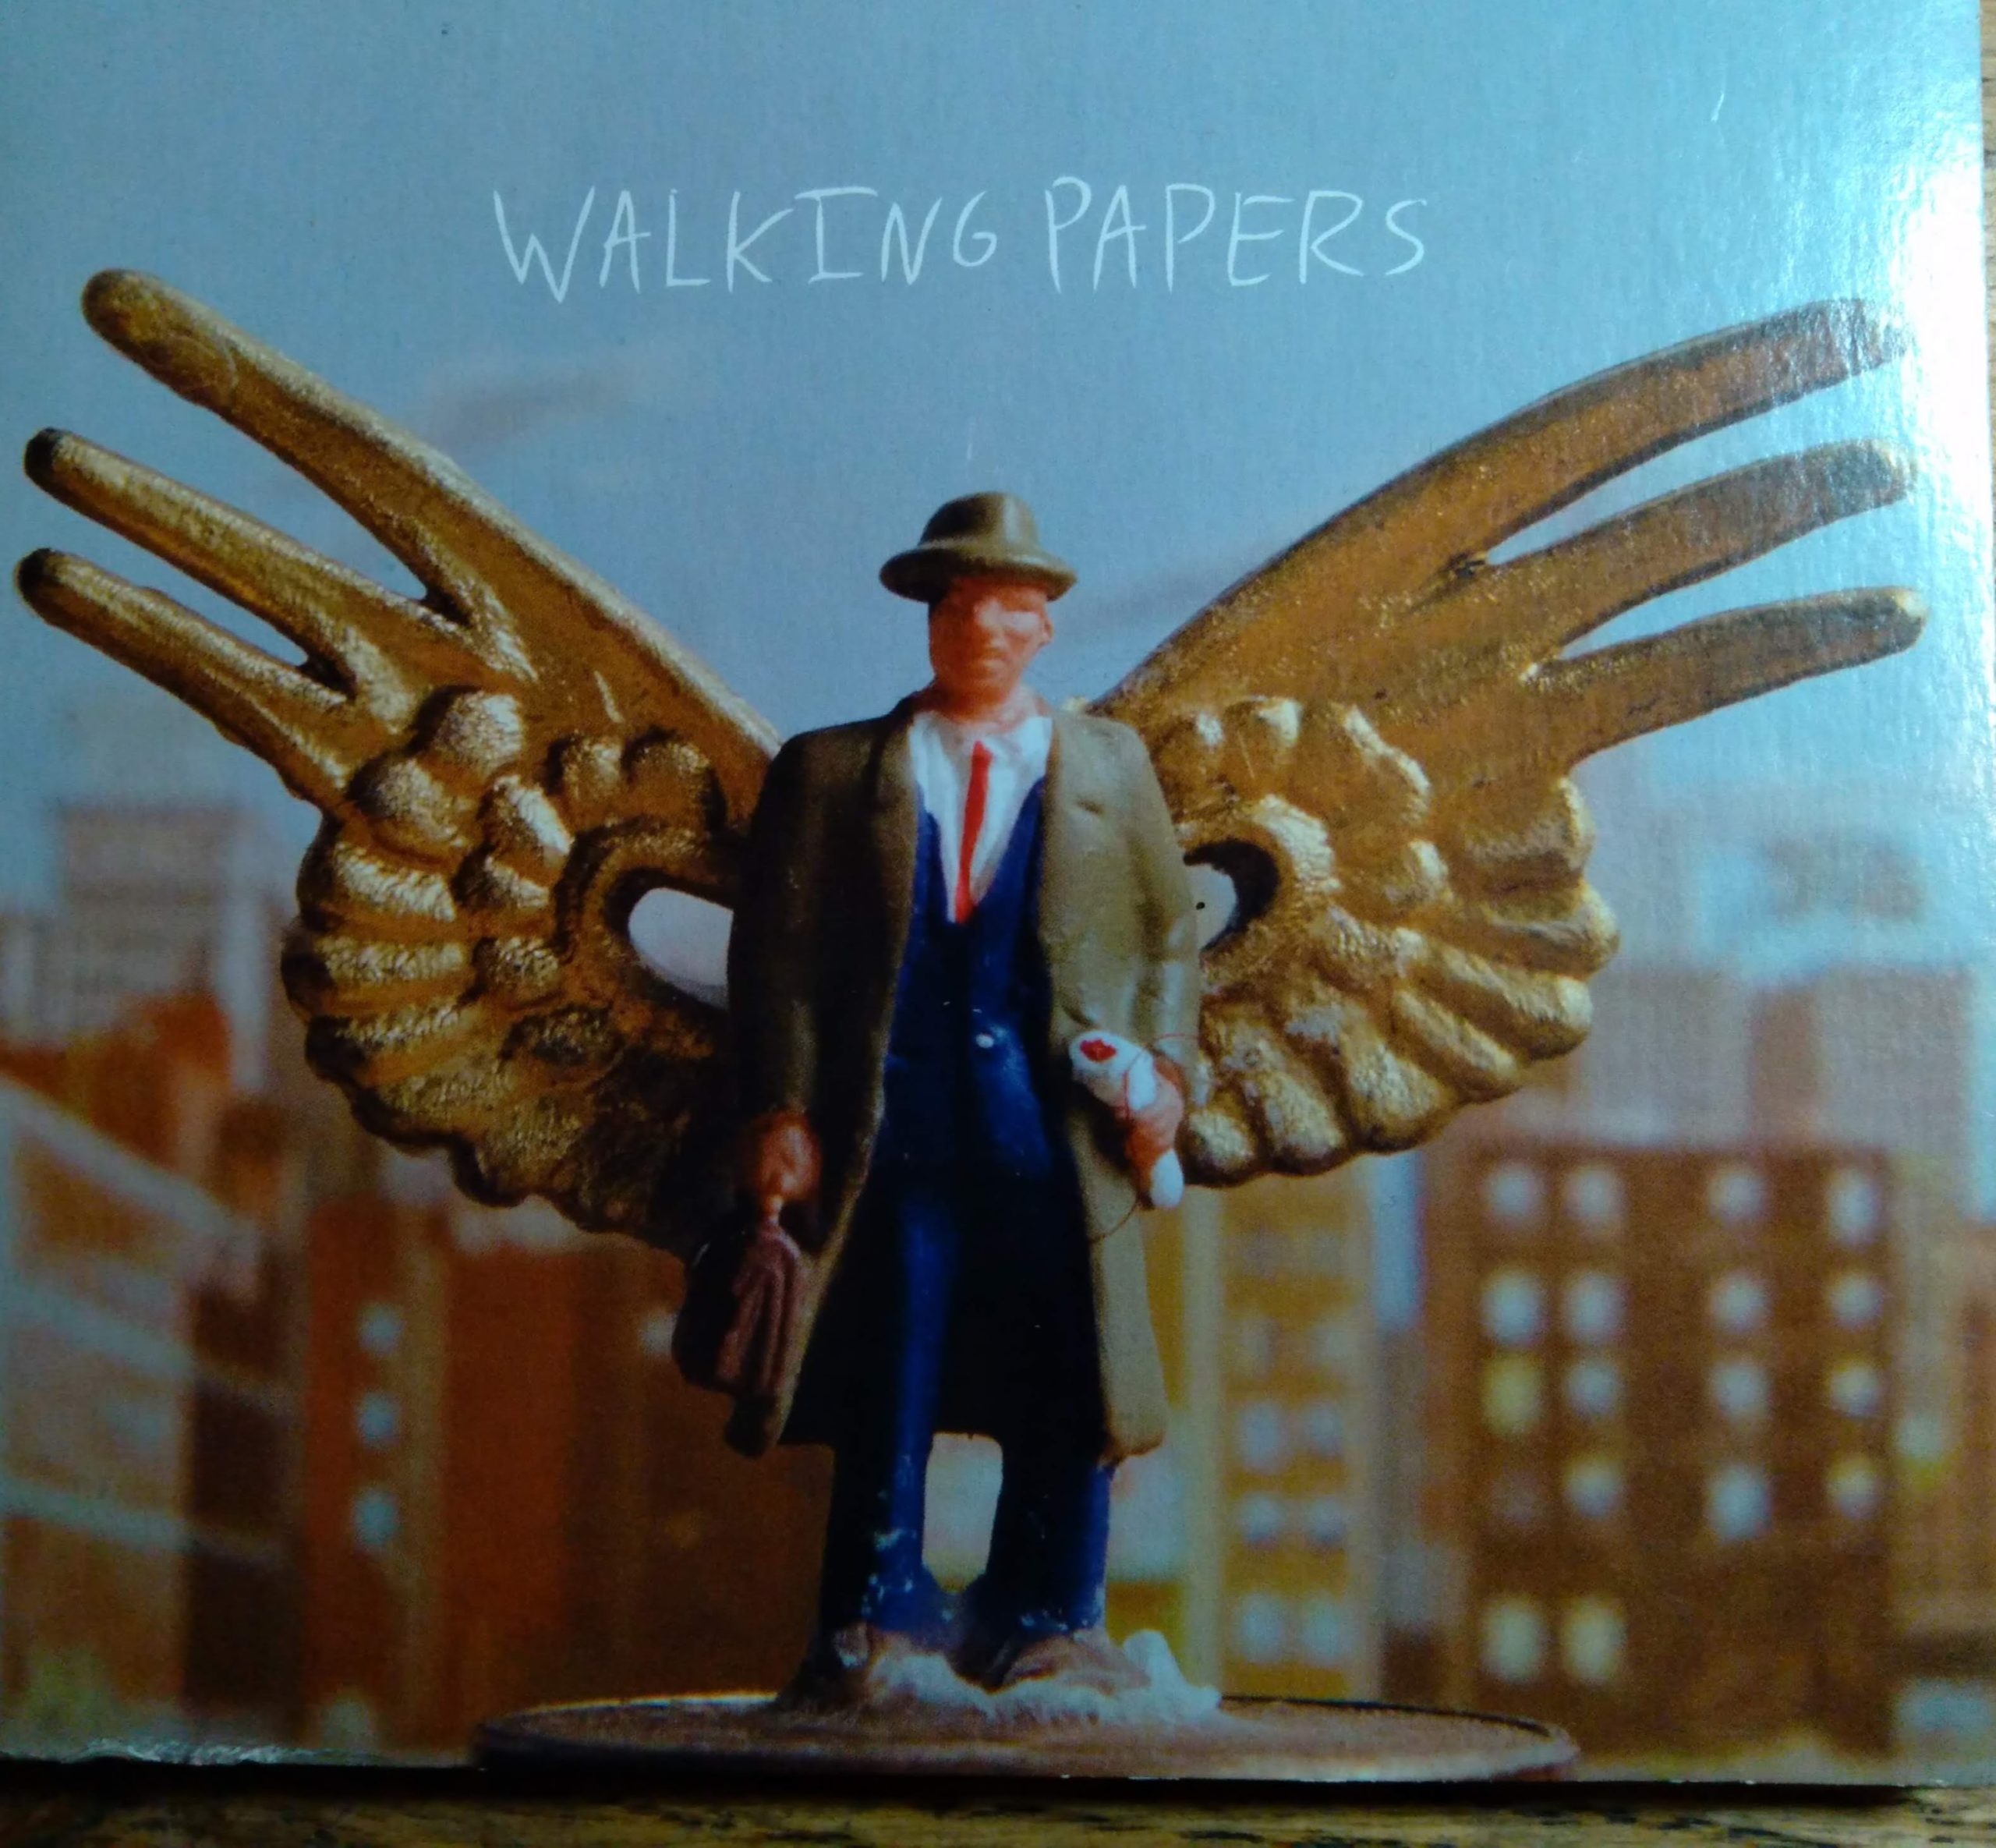 Walking Papers CD front cover